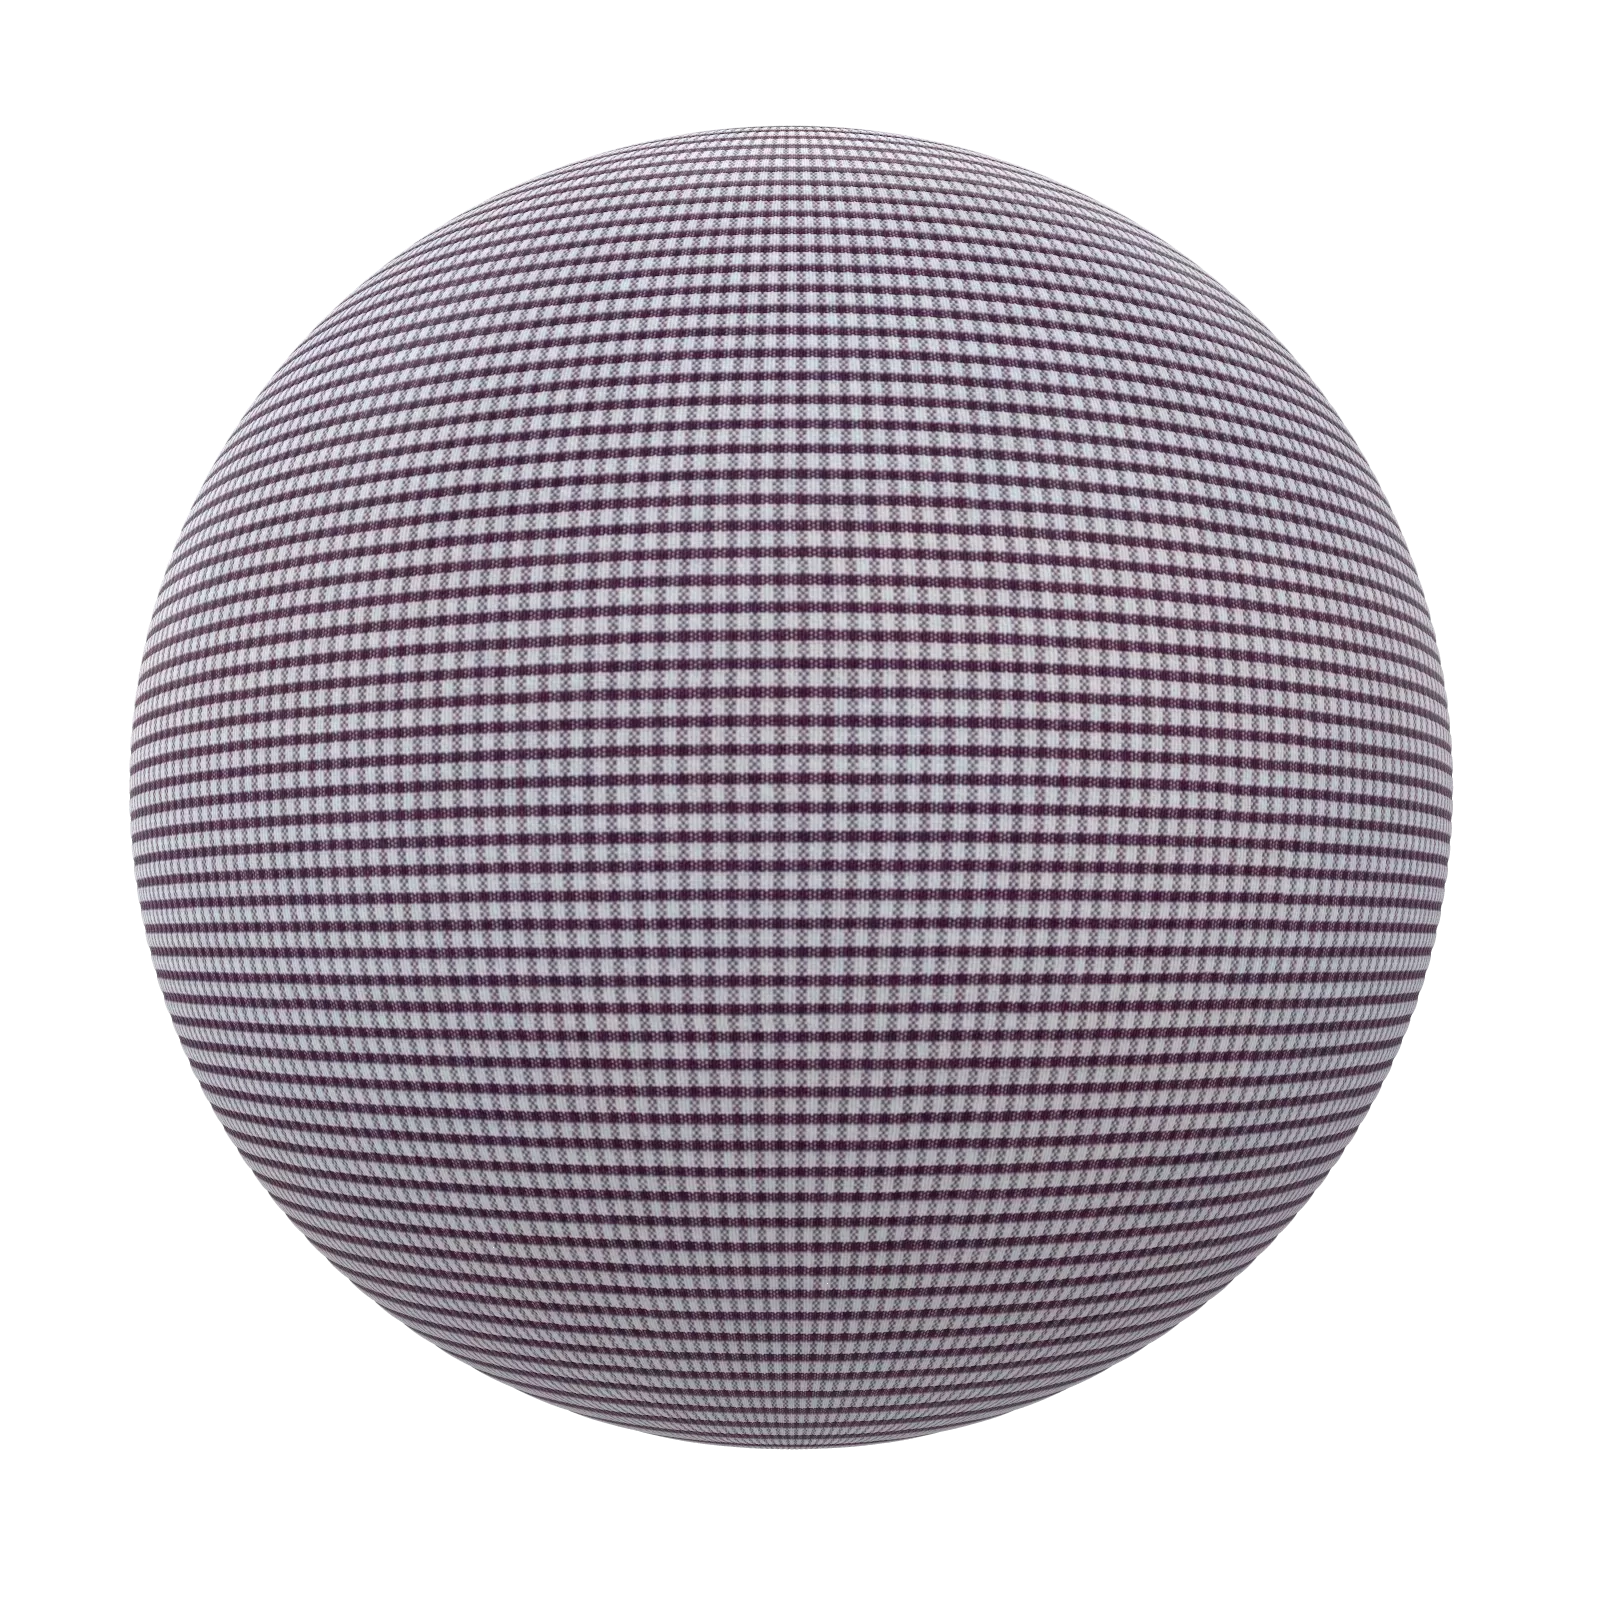 PBR CGAXIS TEXTURES – FABRICS – Patterned Fabric 01